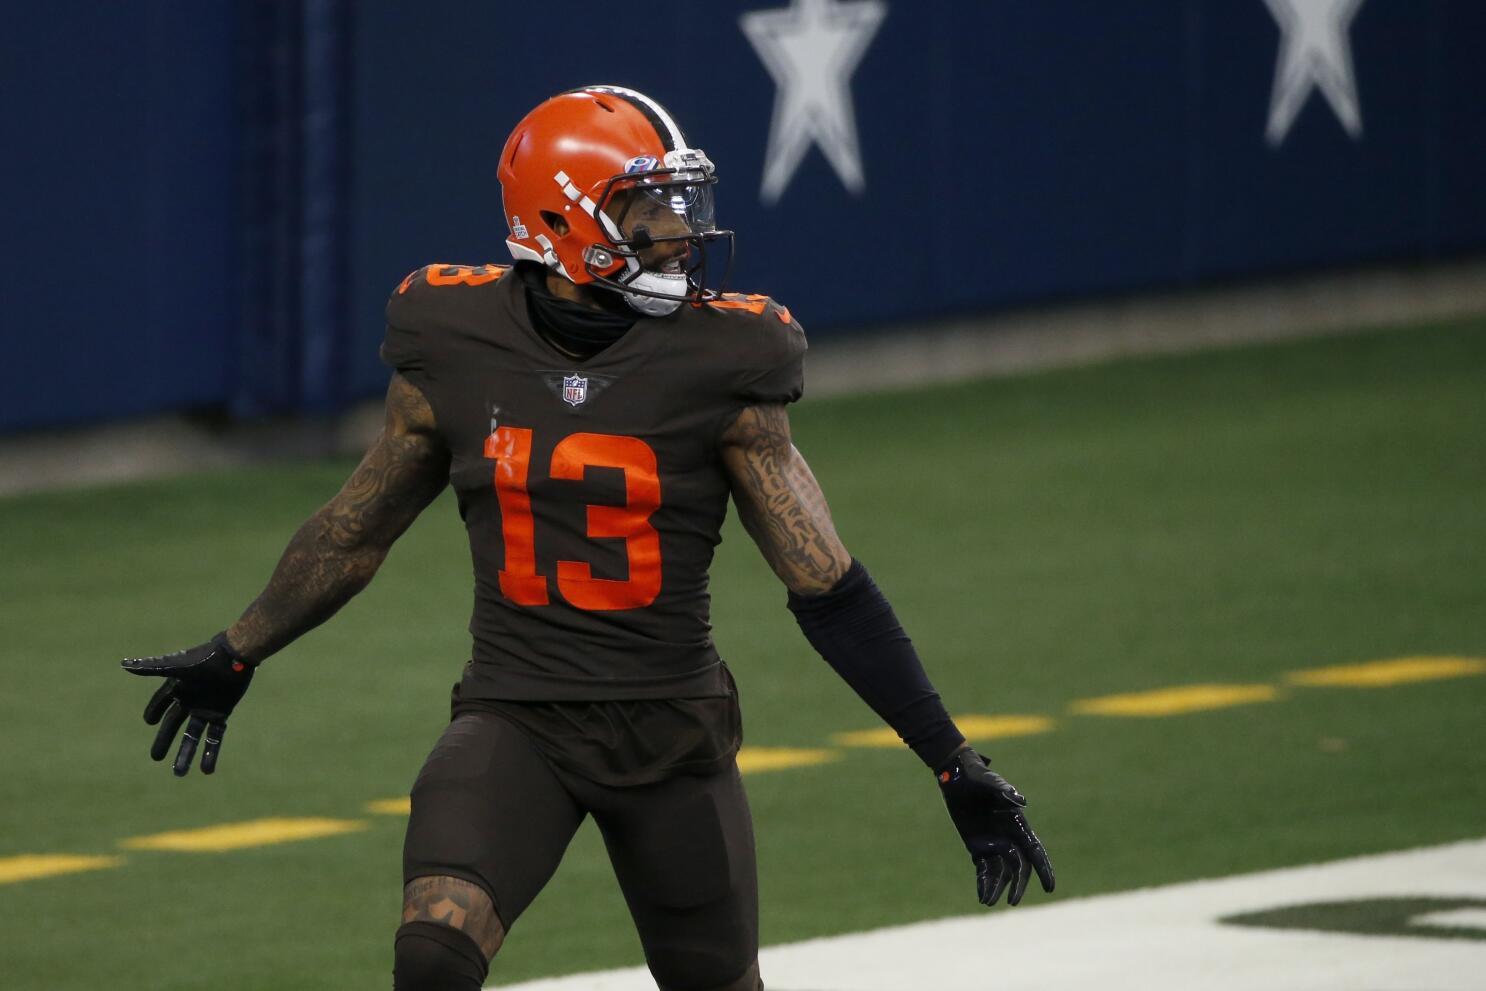 Beckham's 3-TD outing may signal return for Browns' star - The San